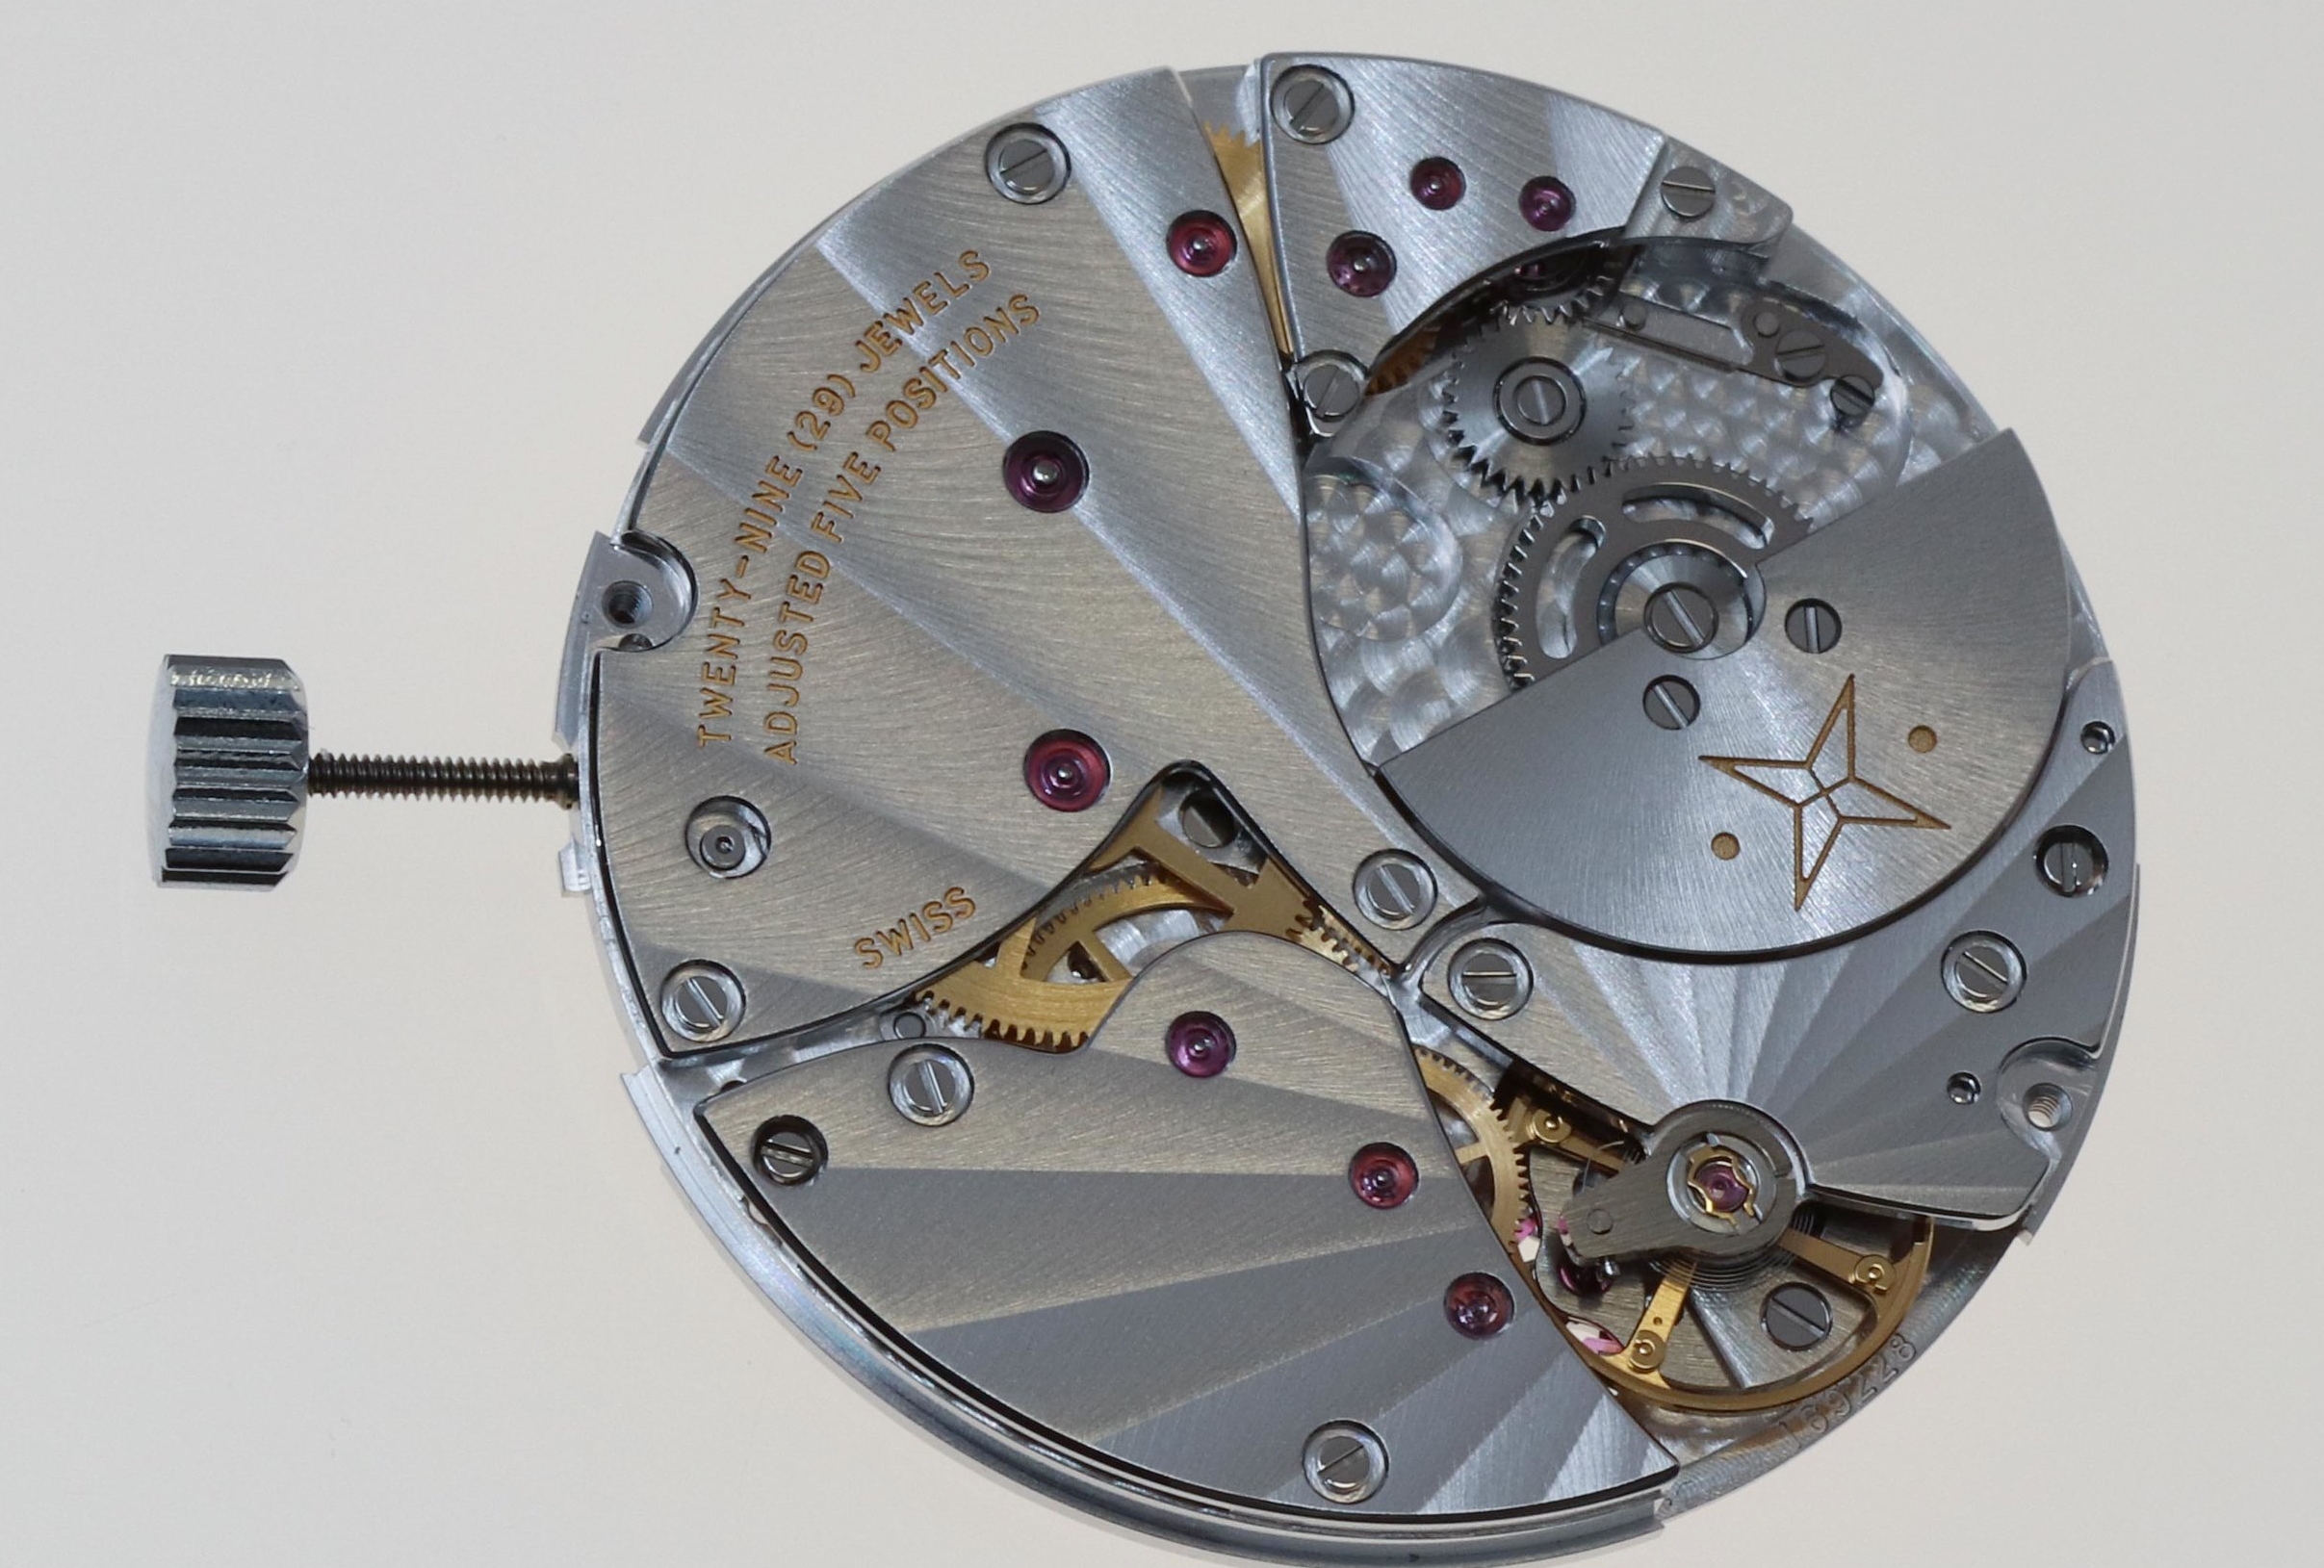 Inside Vaucher Manufacture Fleurier – How Exactly Watch Parts Are